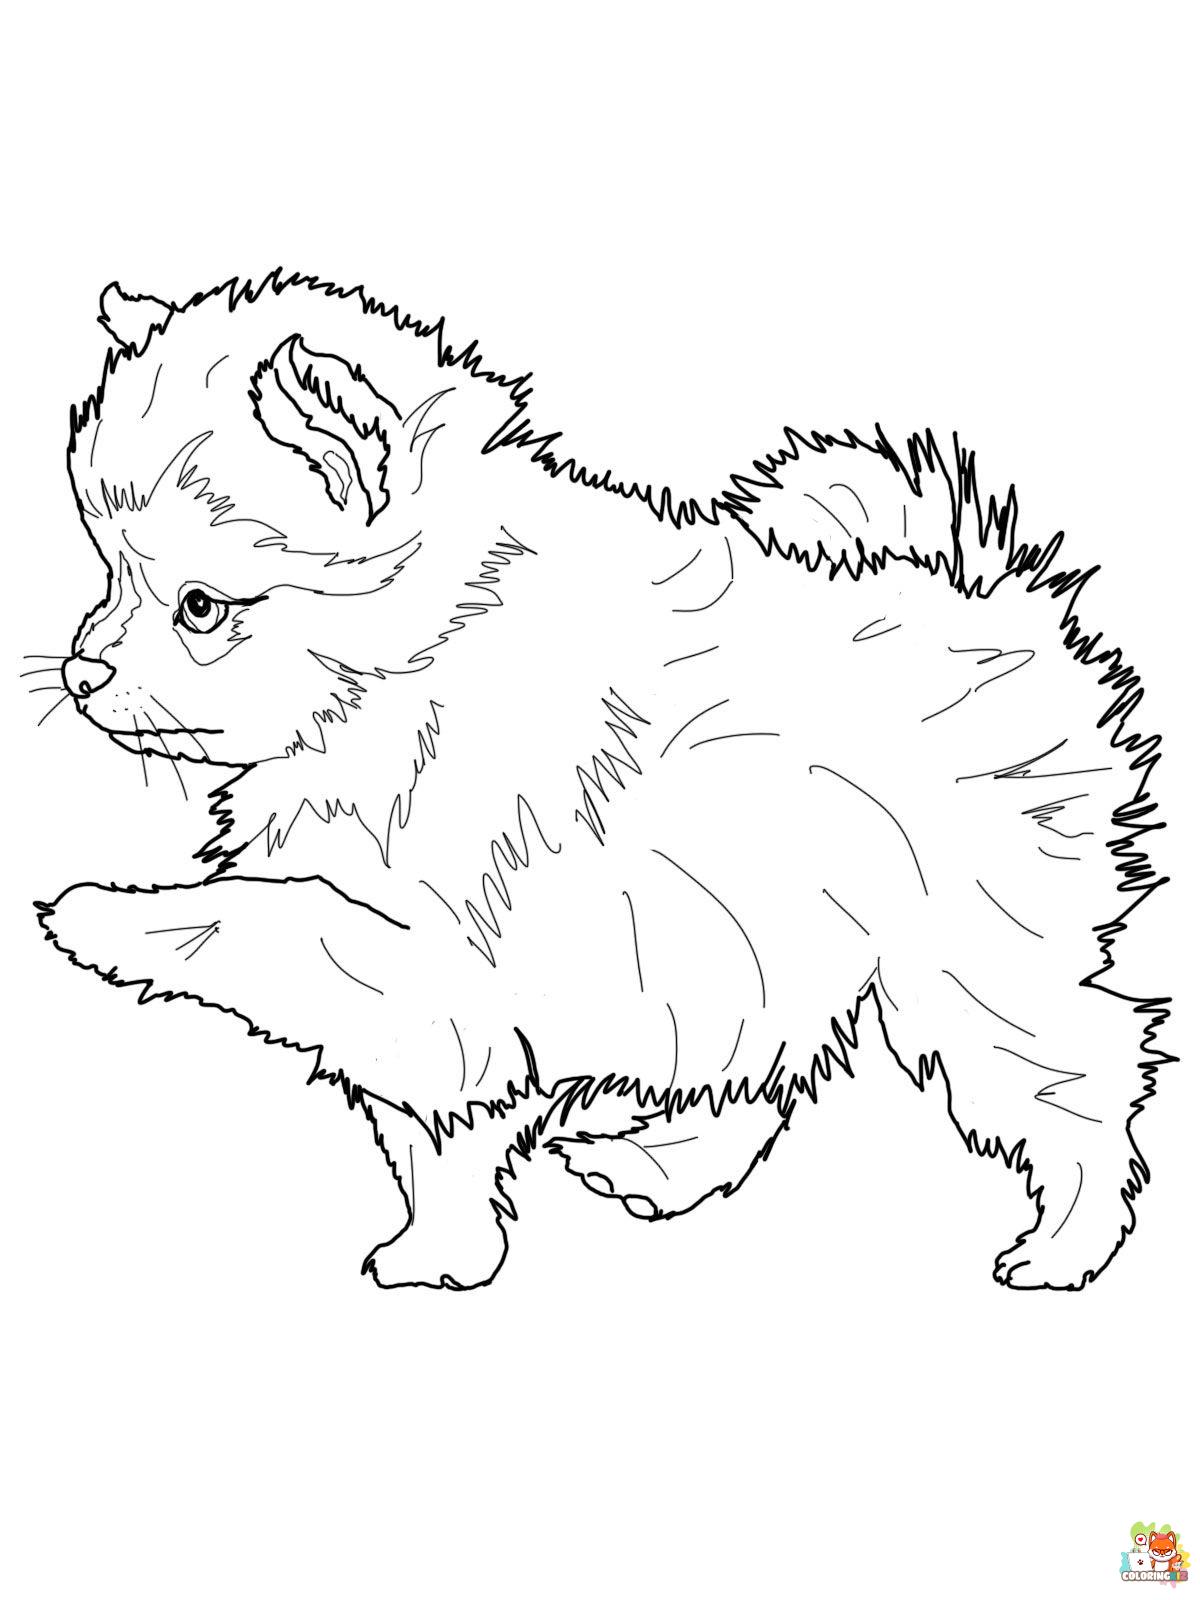 Pomeranian and Chihuahua Coloring Pages 9